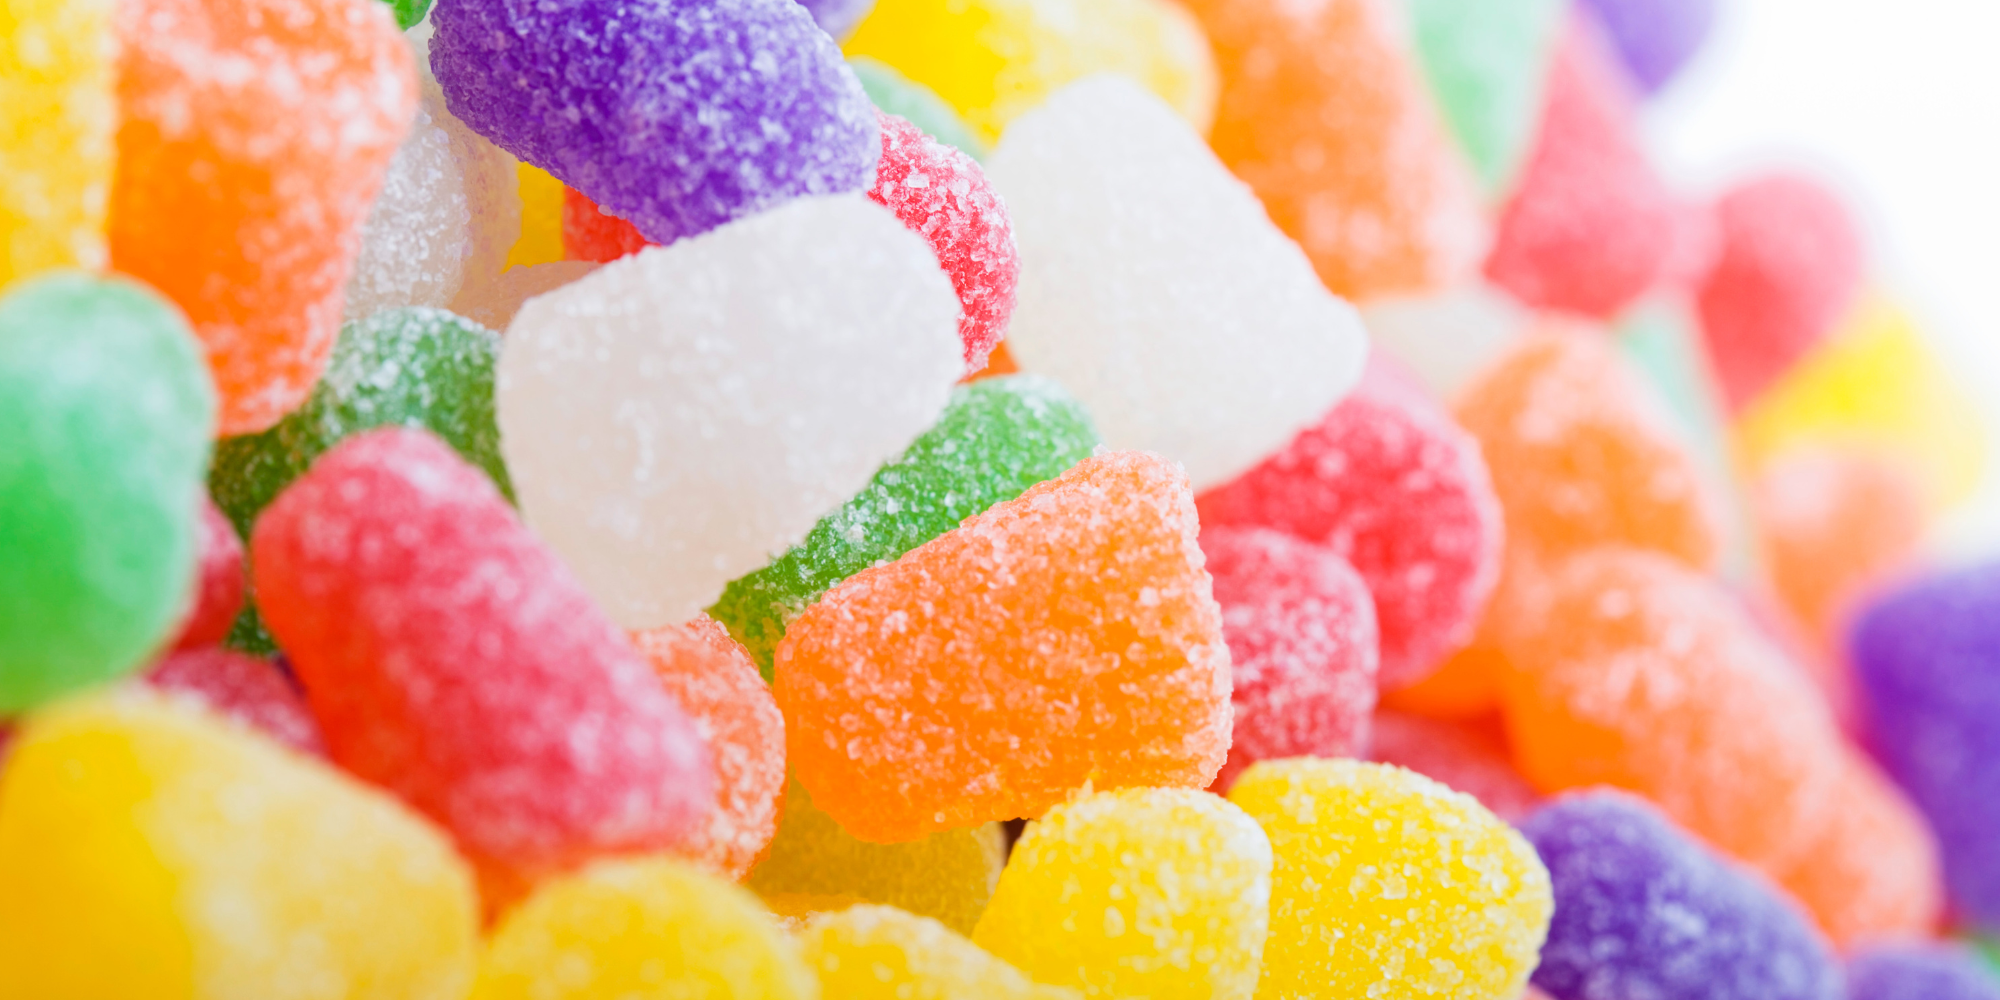 Colorful candy gumdrops dusted in sugar fading in focus towards the right of the image